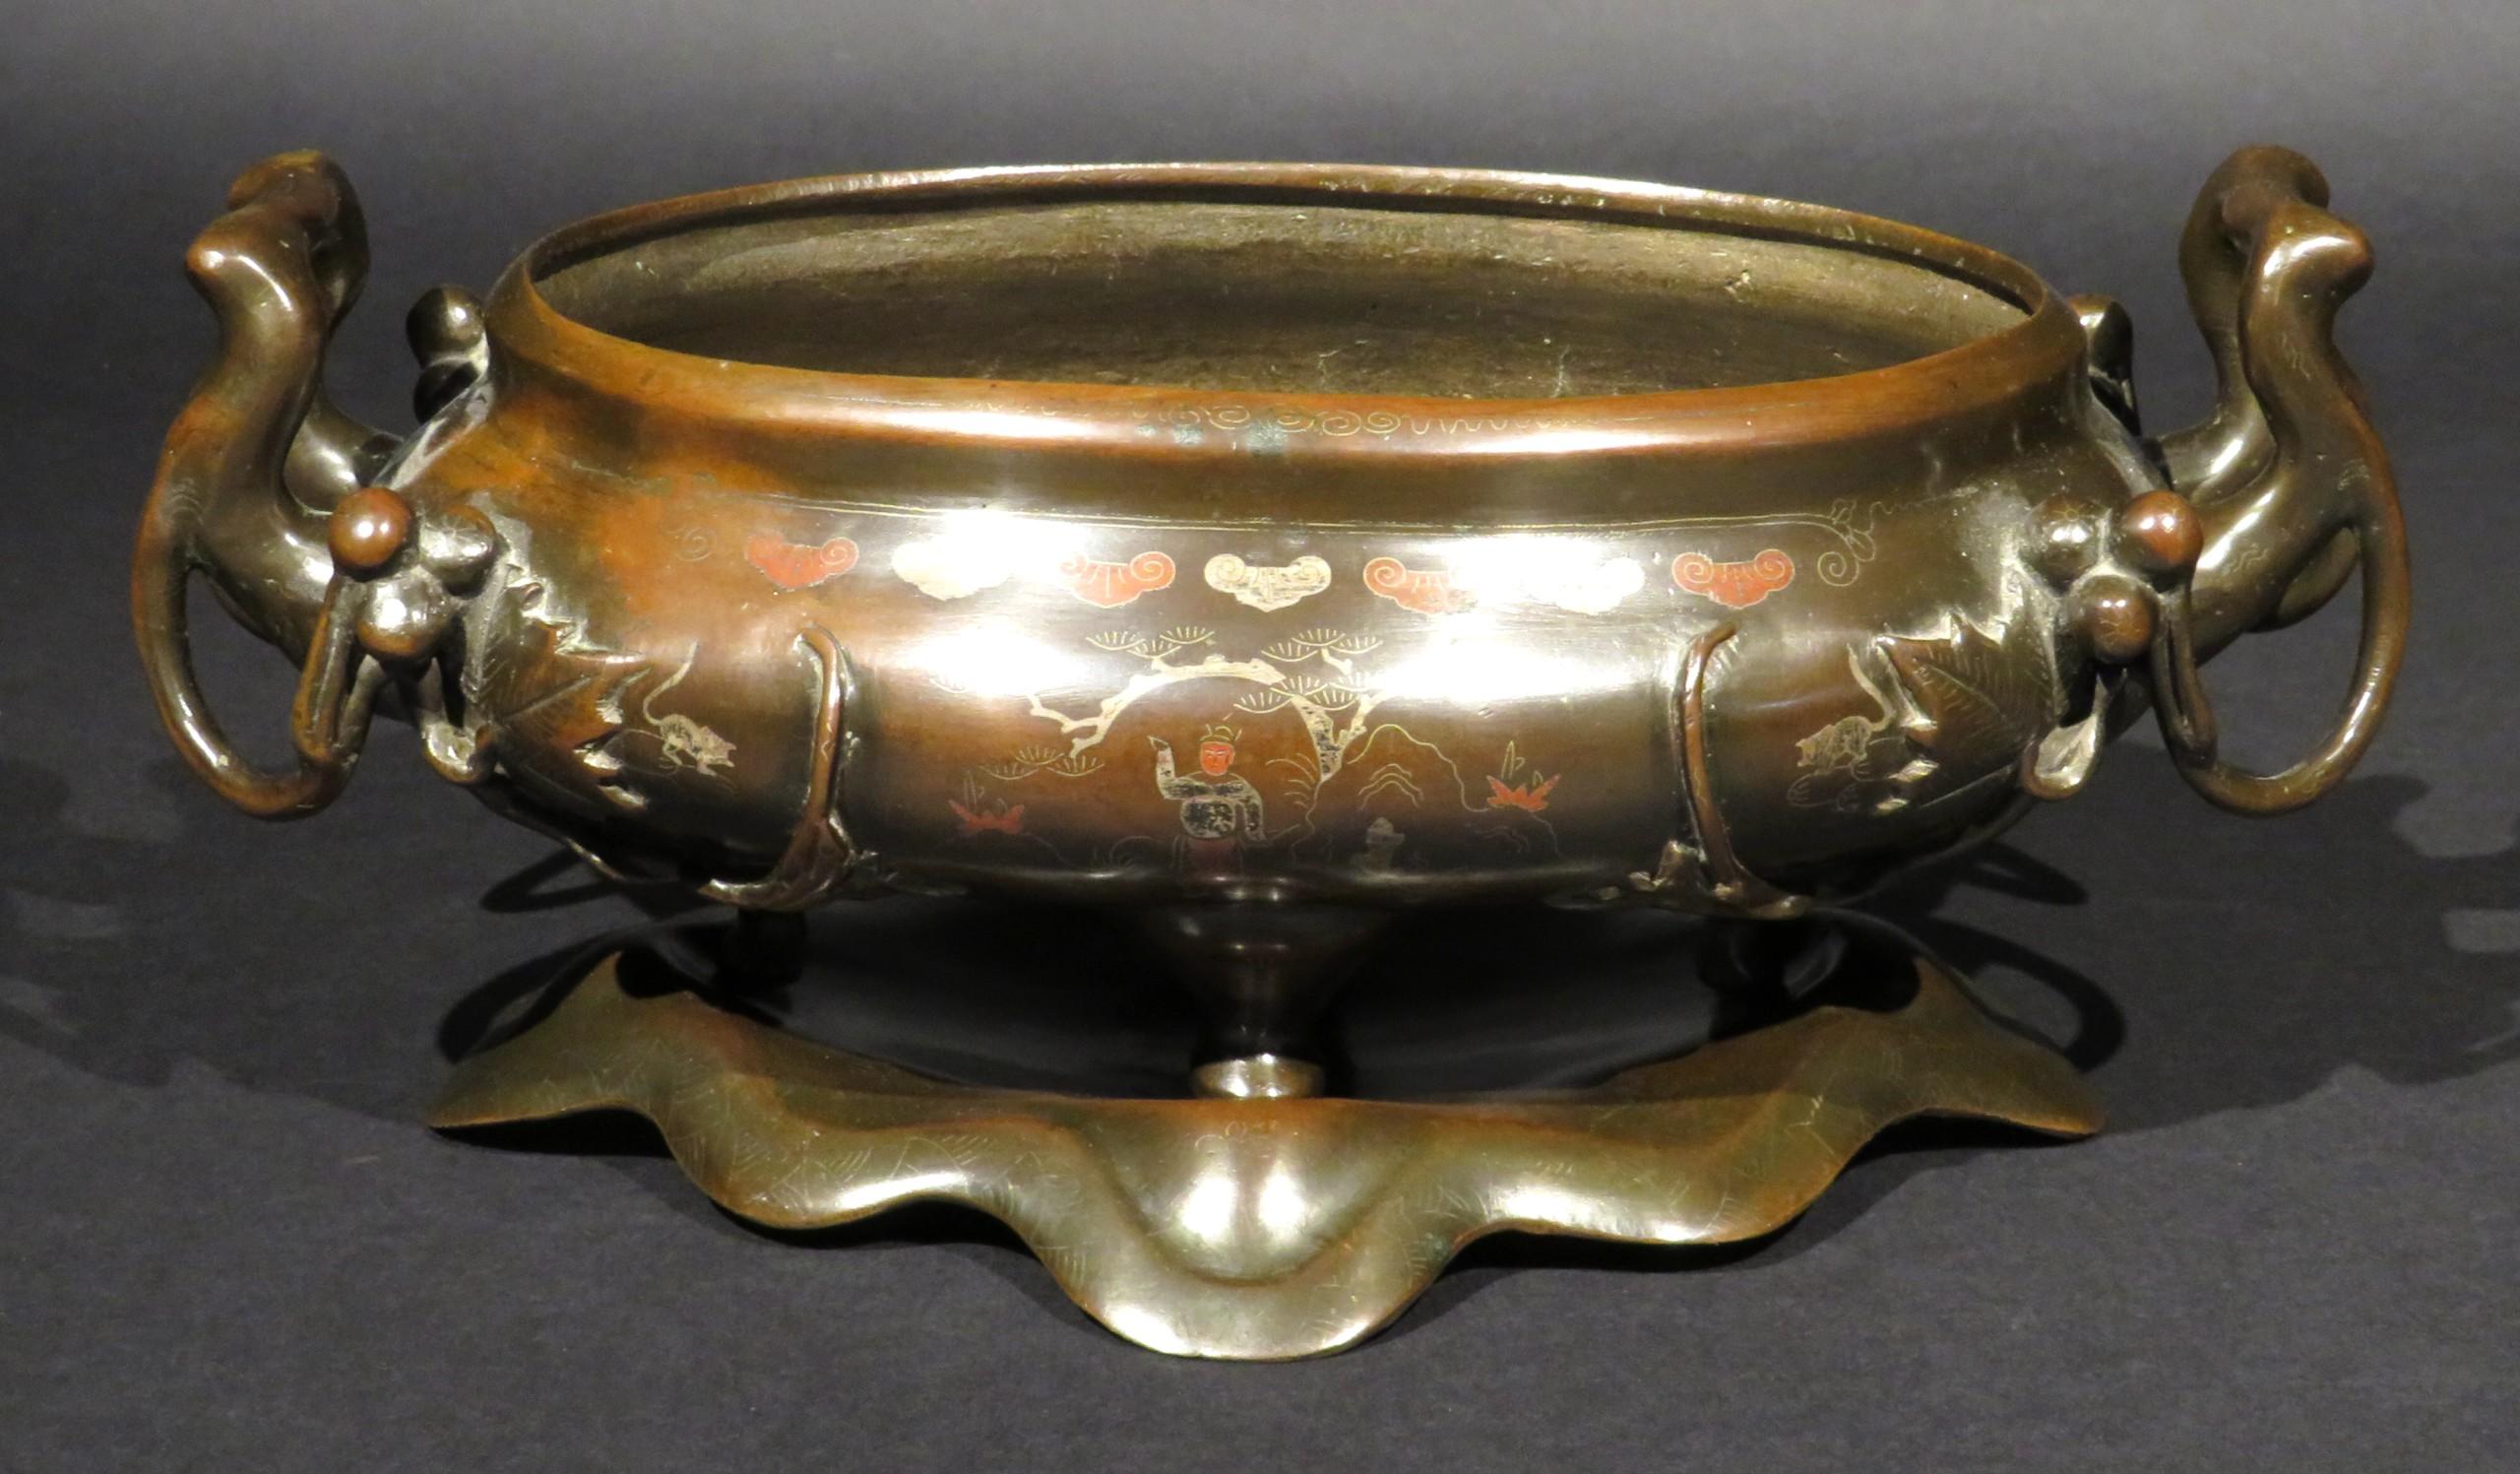 Cast A Very Fine Japanese Mixed Metal Bronze Doban / Suiban, Meiji Period (1868-1912) For Sale